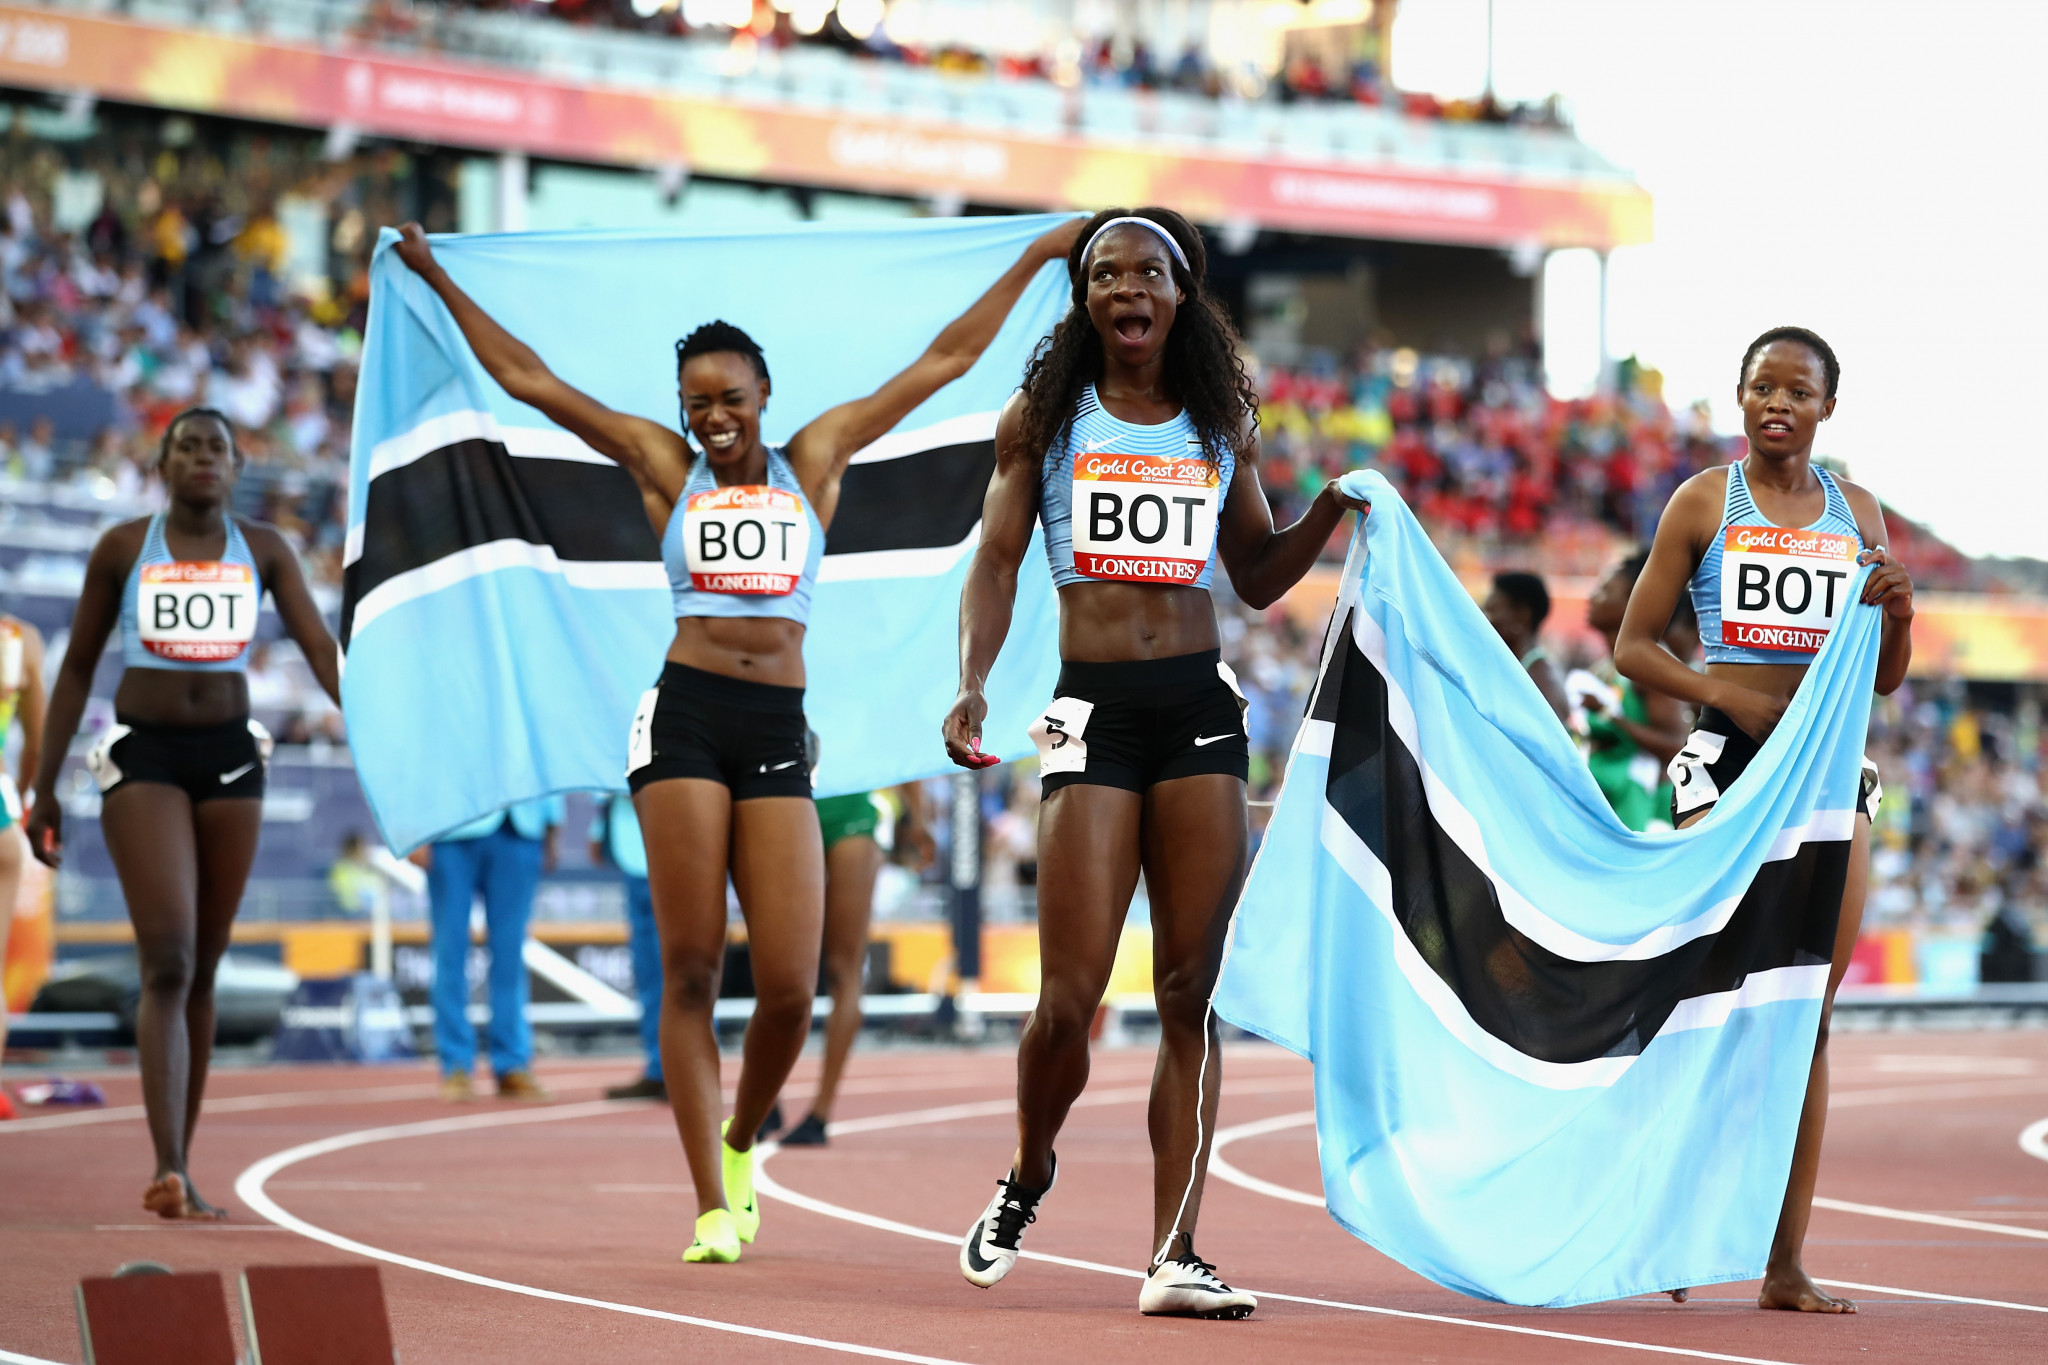 Botswana National Olympic Committee revises Tokyo 2020 medal target due to COVID-19